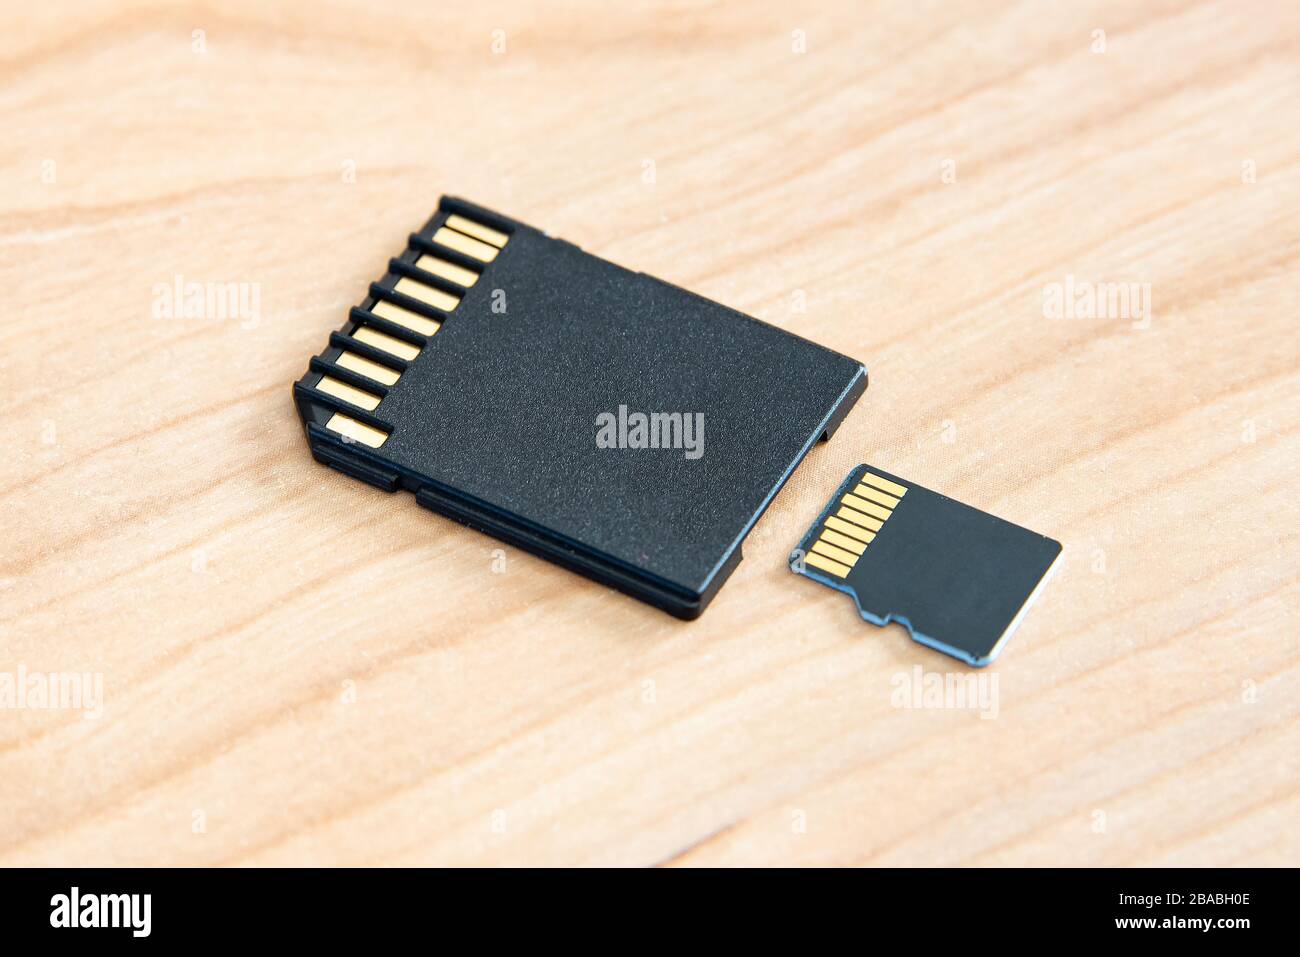 A SD memory card on a wooden surface. Stock Photo